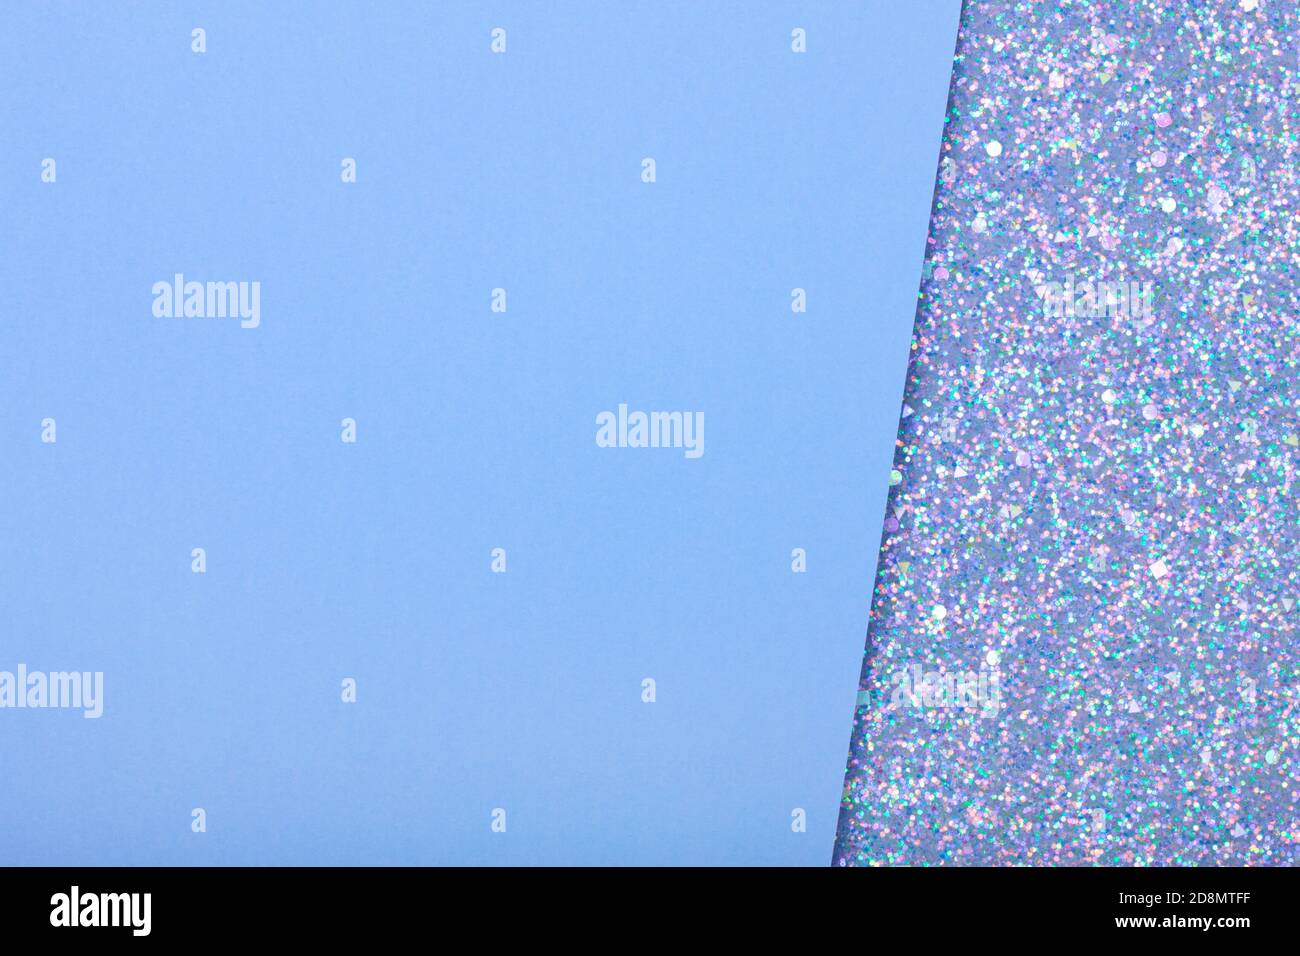 Holographic bright white glitter real texture background with rectangular sequins. Stock Photo